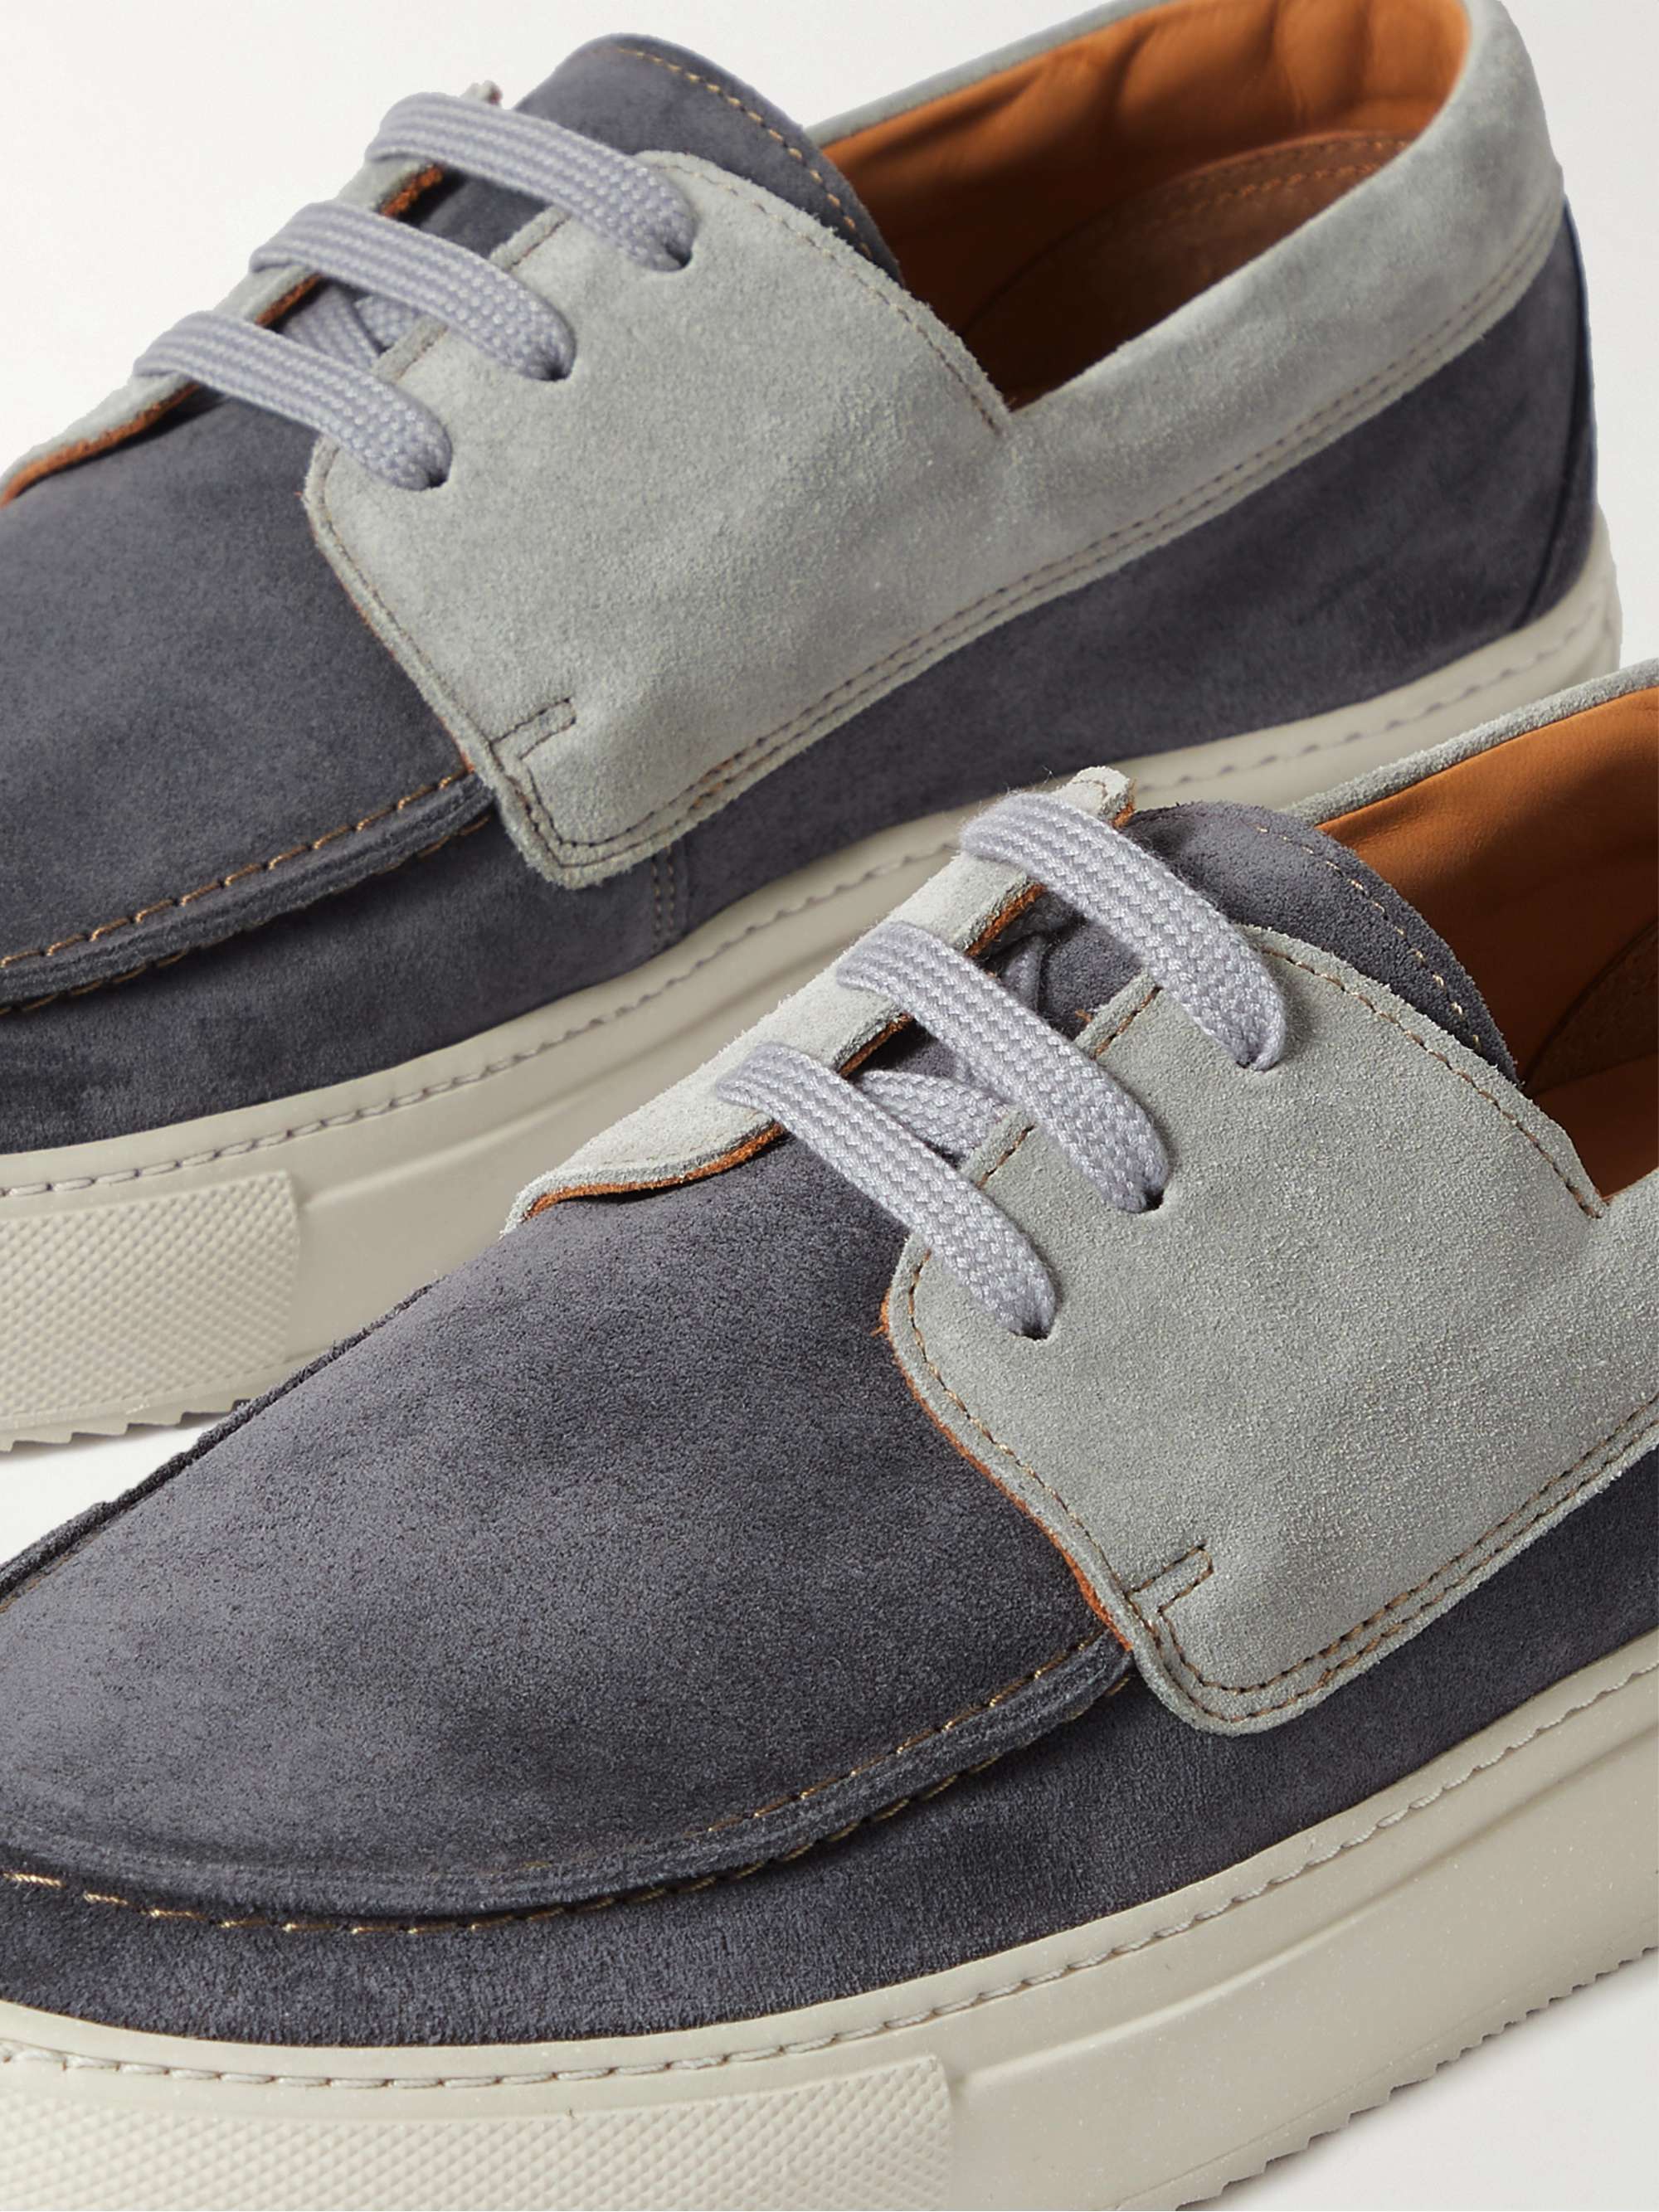 MR P. Larry Two-Tone Regenerated Suede by evolo® Boat Shoes